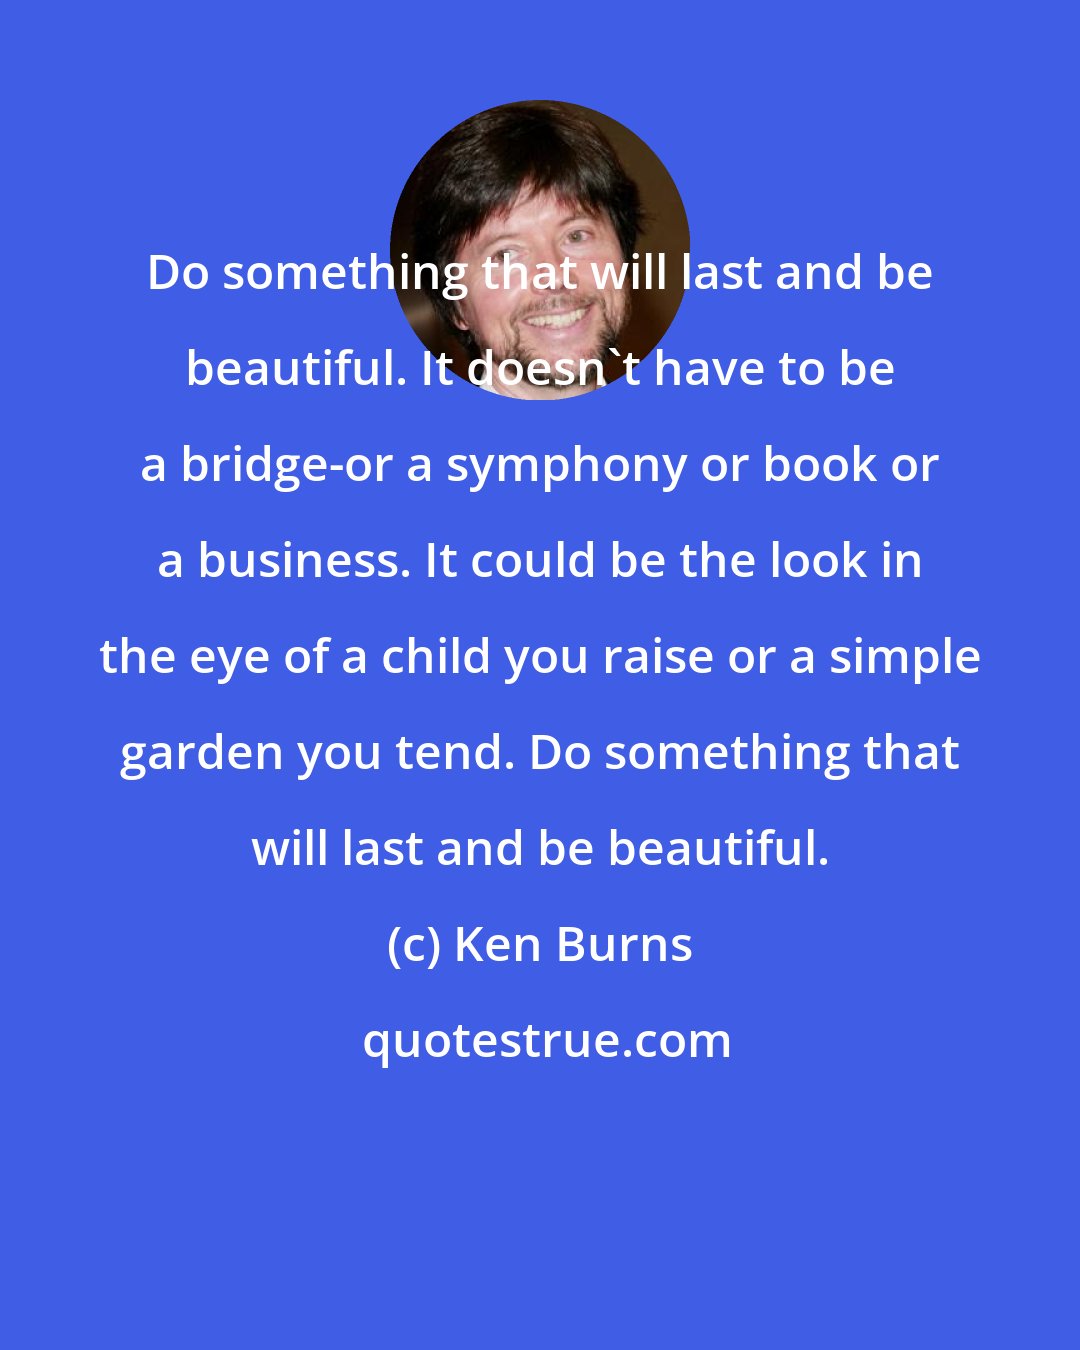 Ken Burns: Do something that will last and be beautiful. It doesn't have to be a bridge-or a symphony or book or a business. It could be the look in the eye of a child you raise or a simple garden you tend. Do something that will last and be beautiful.